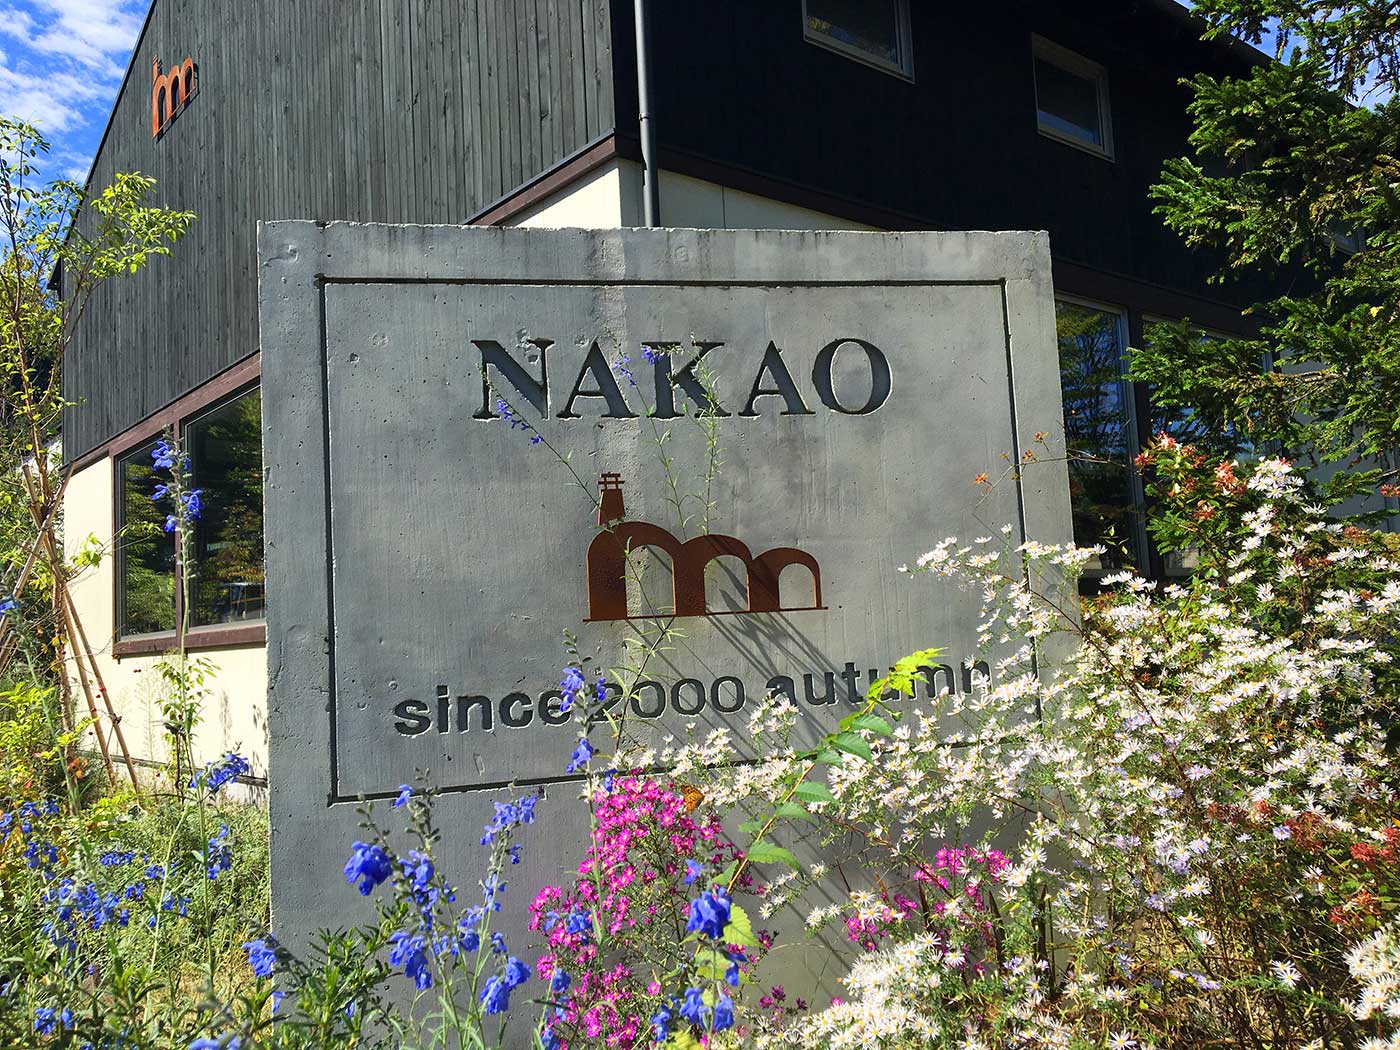 Nakao Cafe 仙台隠れ家カフェ紹介 Flaghive Cafe